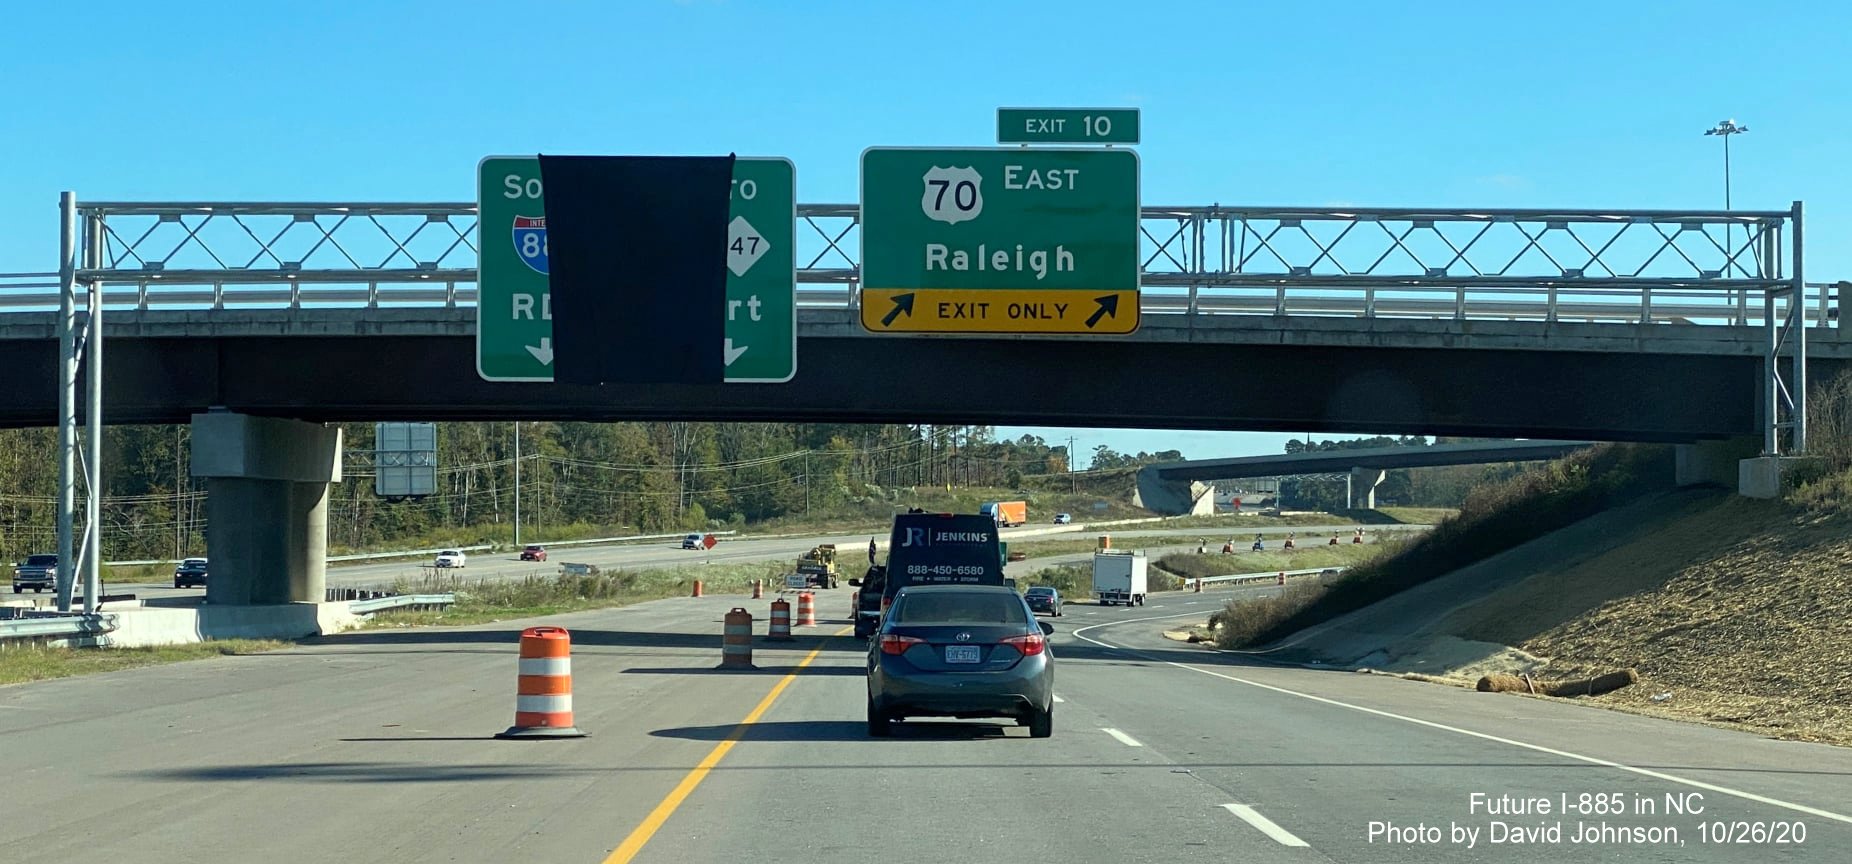 Image of overhead signage at the now opened exit ramp for US 70 East from Future I-885 South/East End Connector in Durham, by David Johnson October 2020